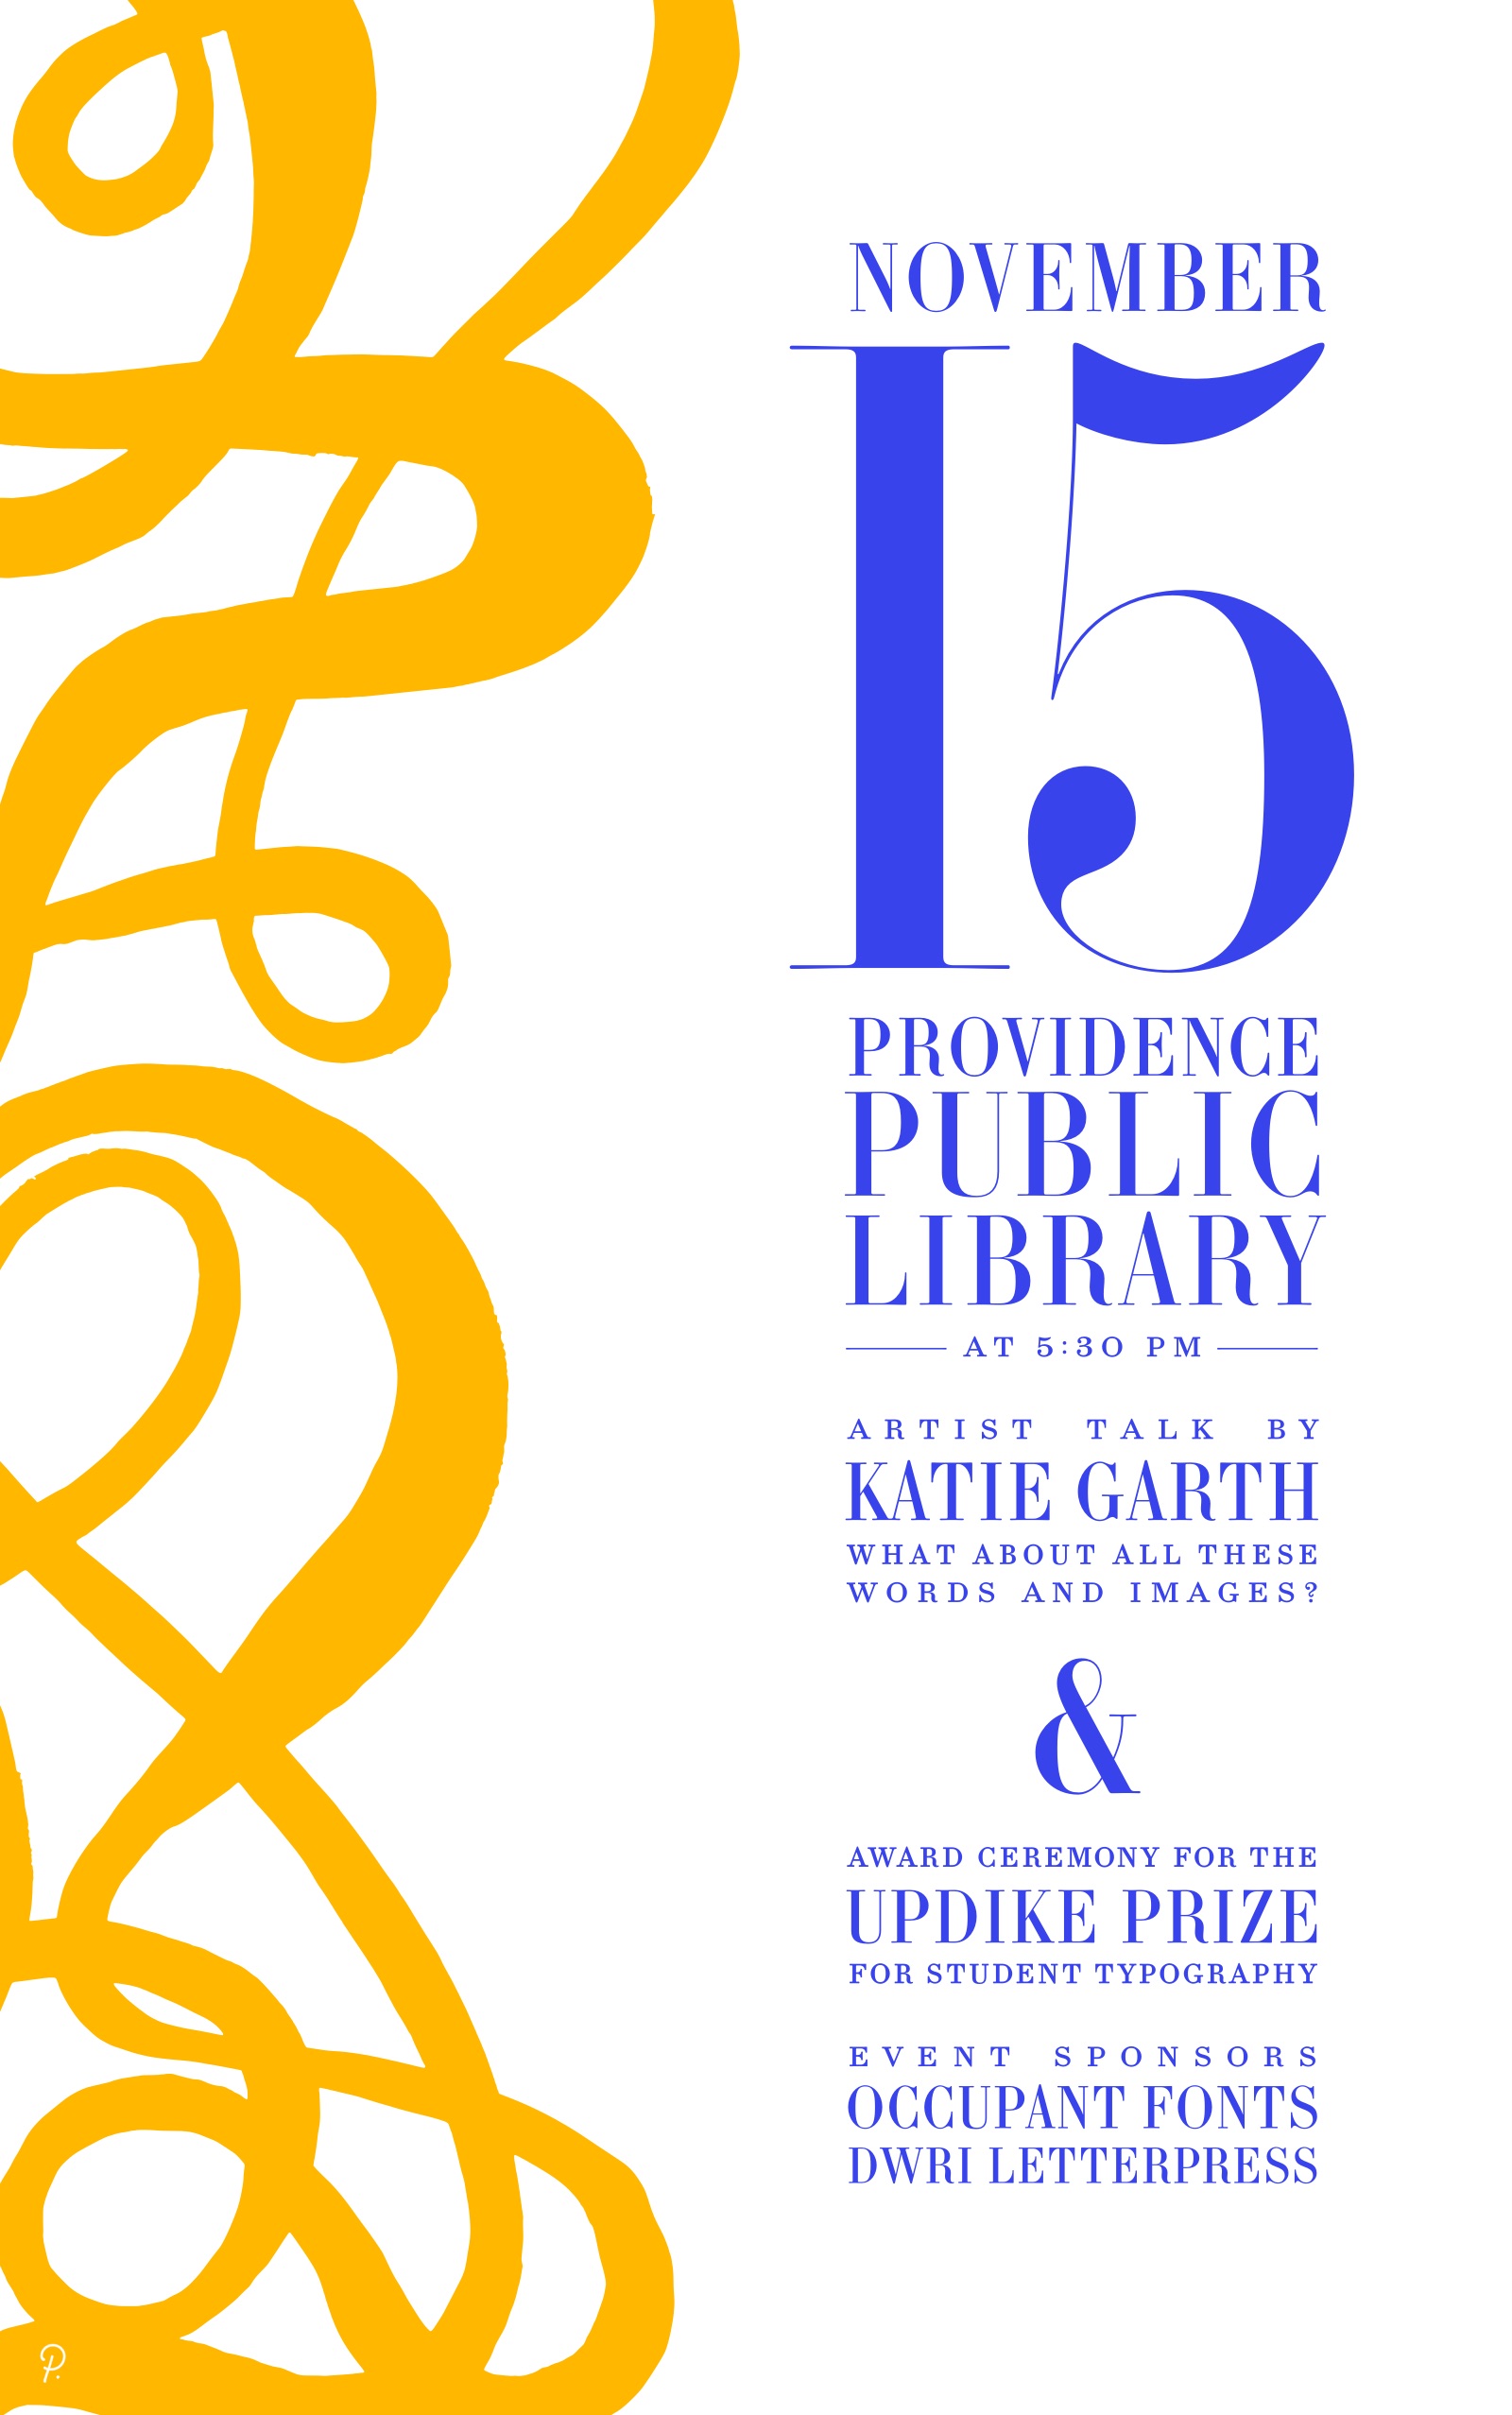 Updike Prize poster designed by Peter Nowell